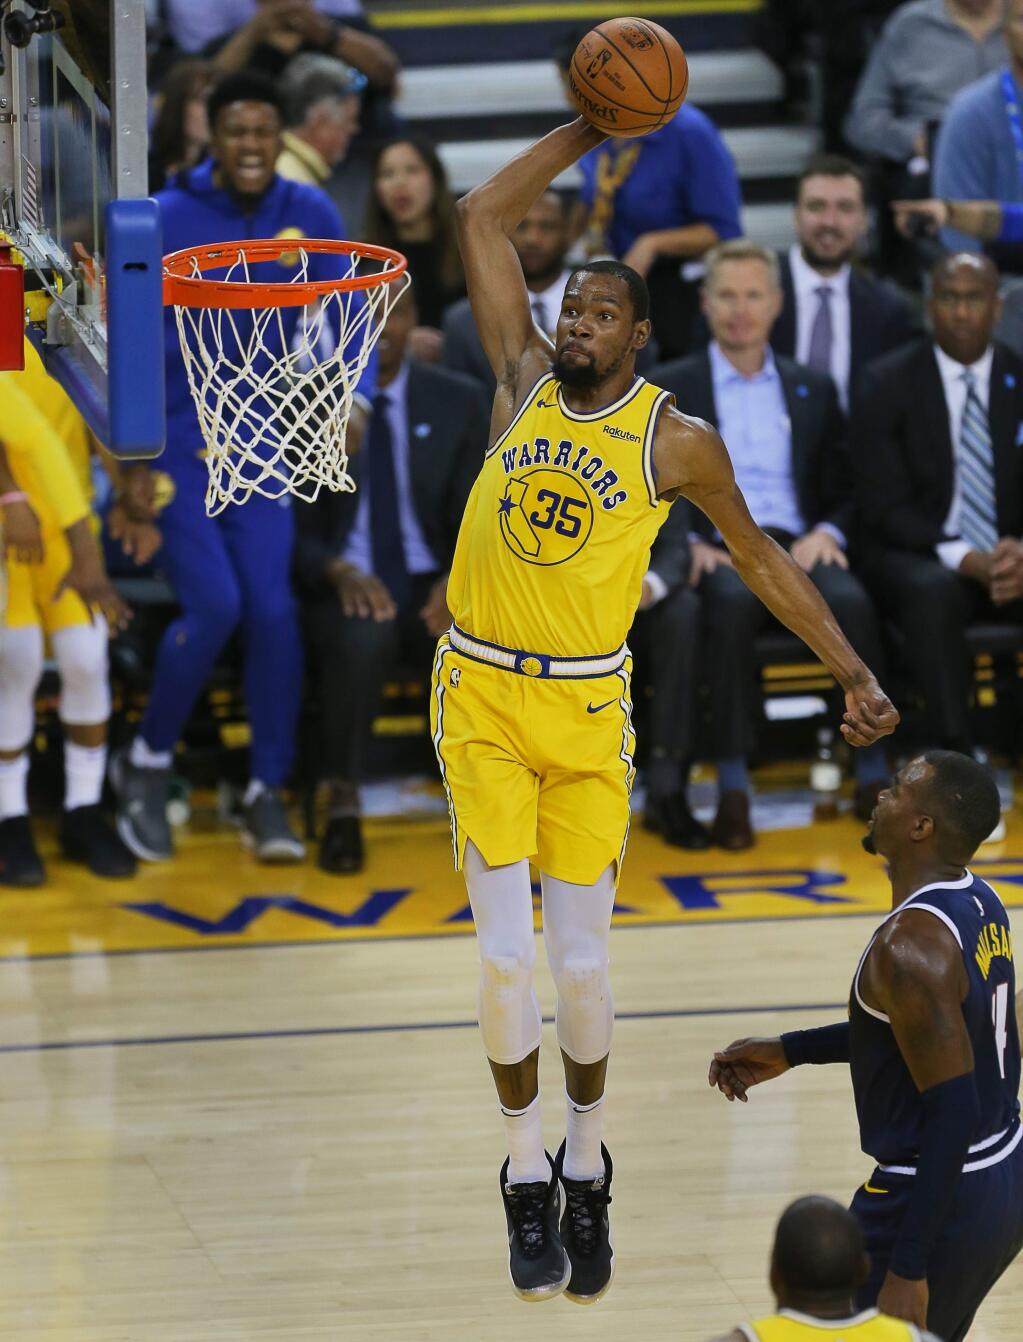 Golden State Warriors forward Kevin Durant dunks the ball against the Denver Nuggets during their game in Oakland on Tuesday, April 2, 2019. (Christopher Chung/ The Press Democrat)